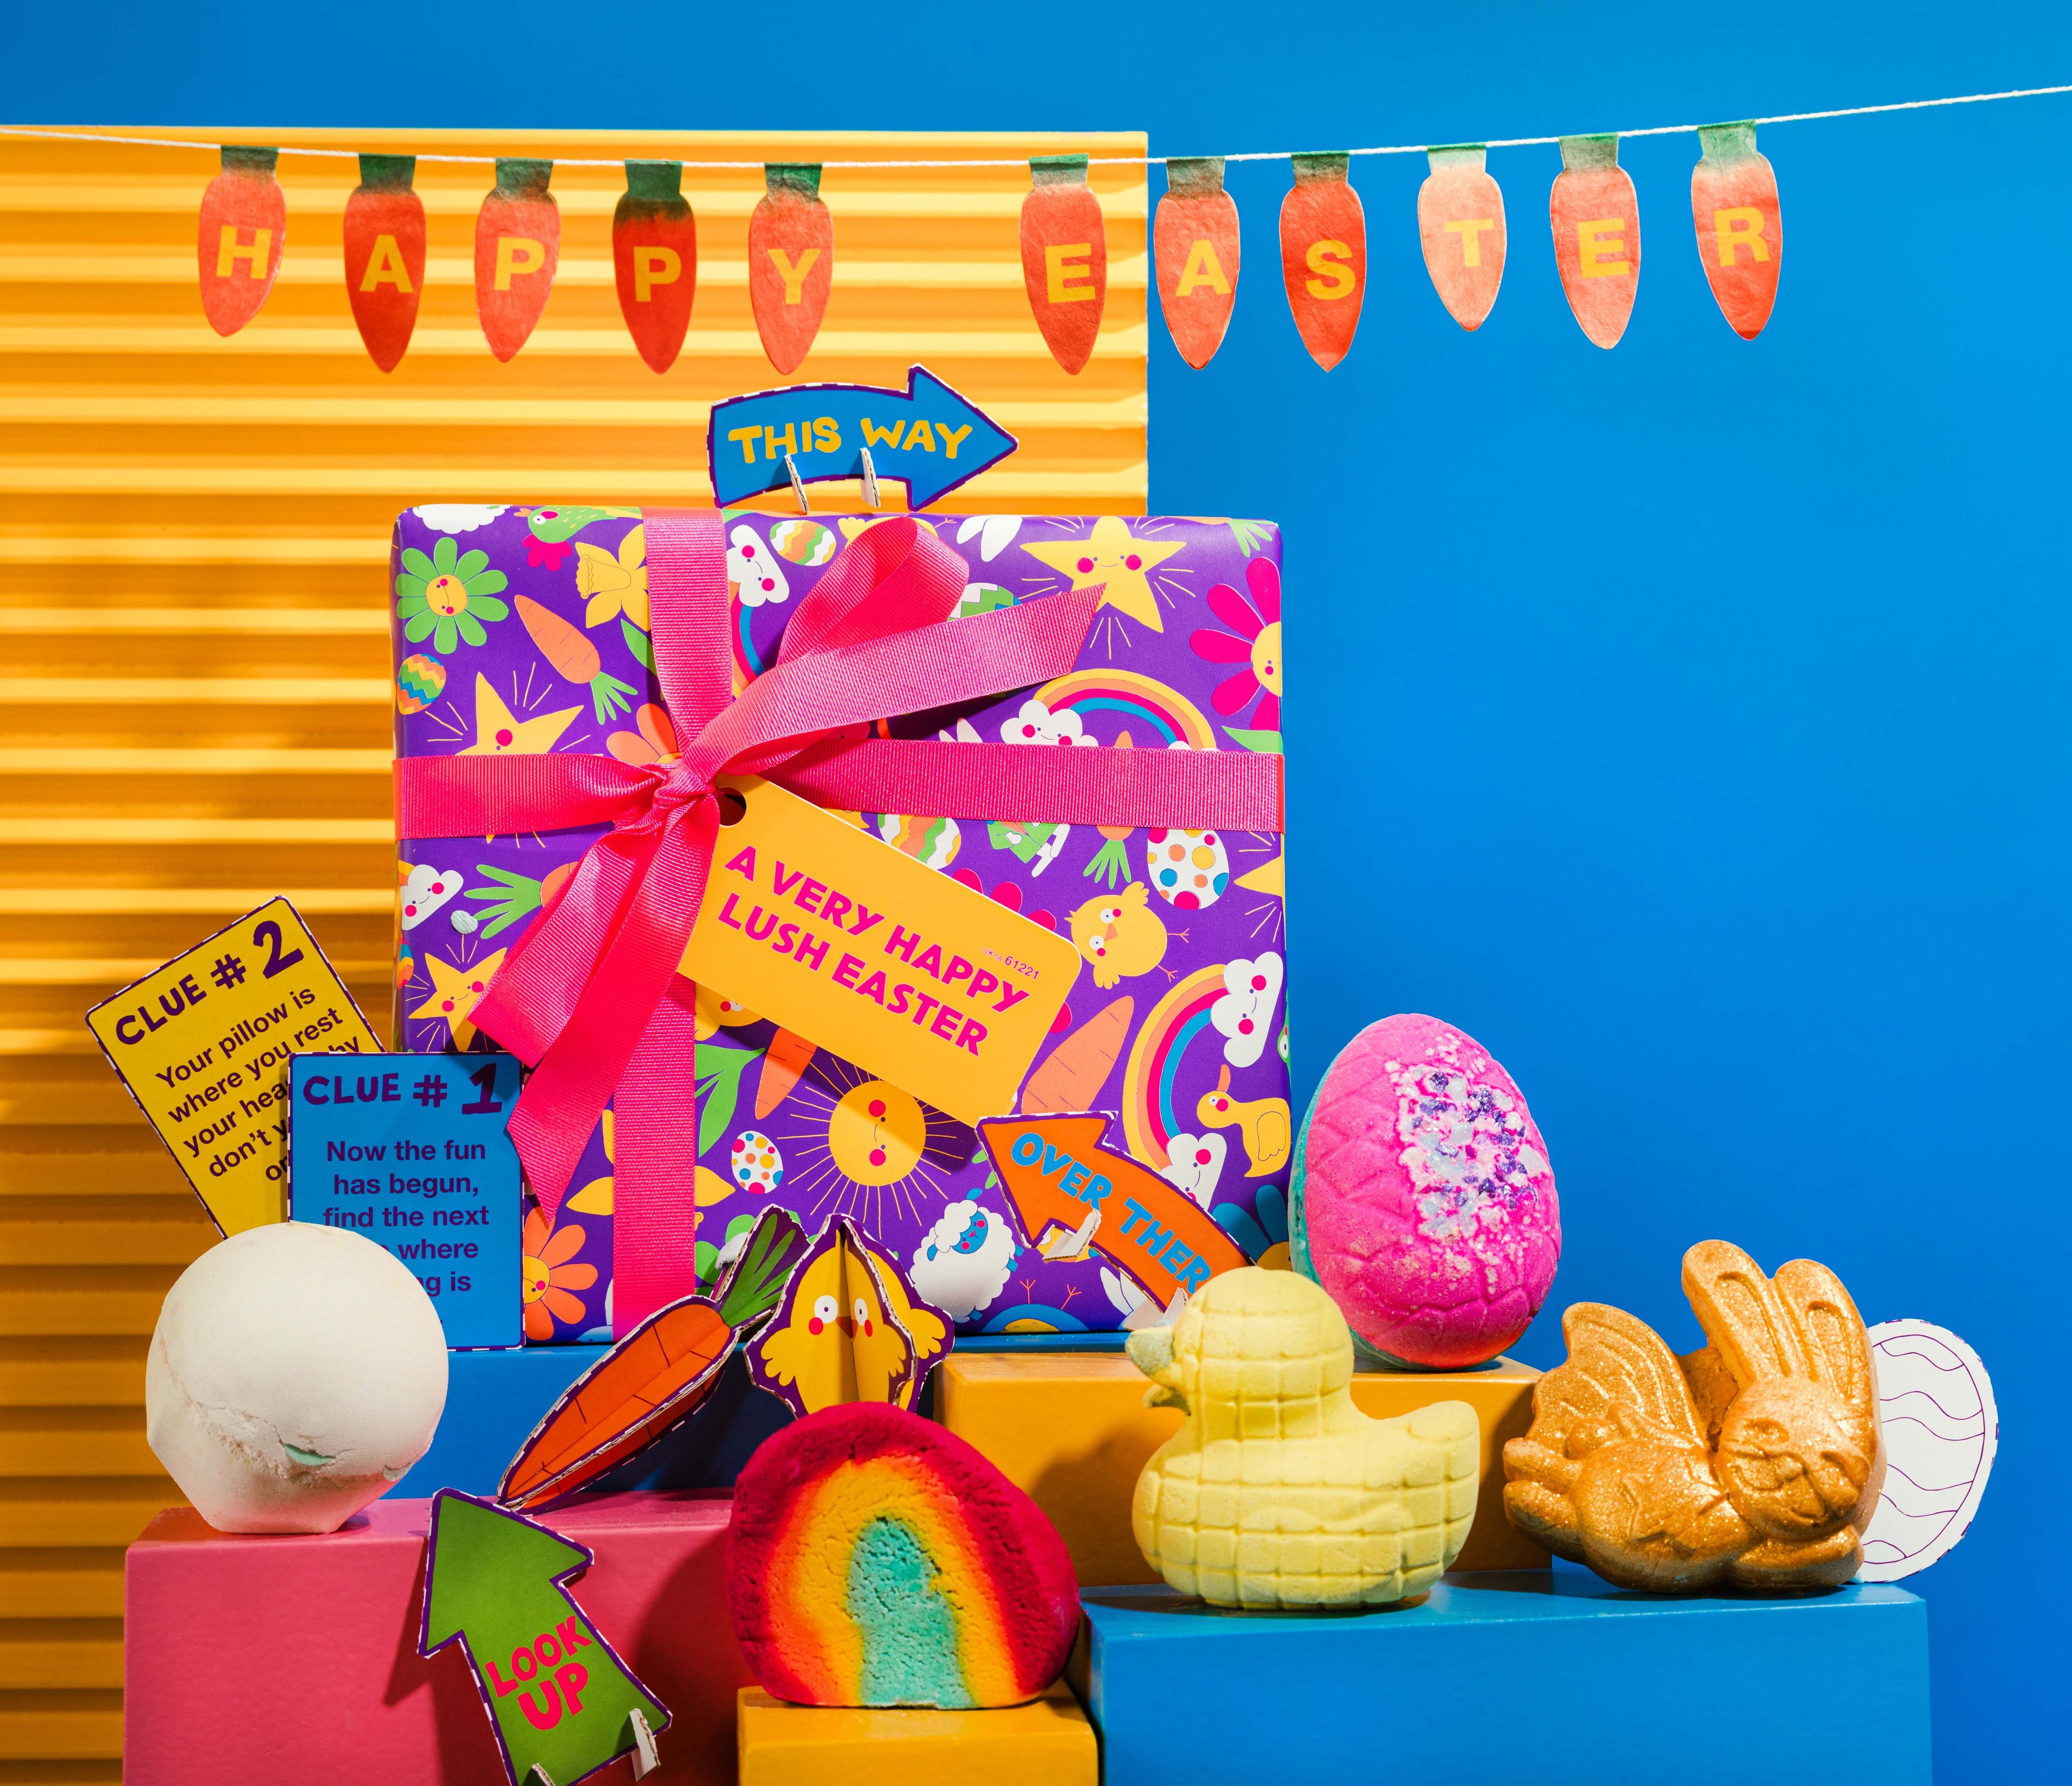 The gift in front of a blue and yellow background, surrounded by its products on blue, yellow and pink plinths.